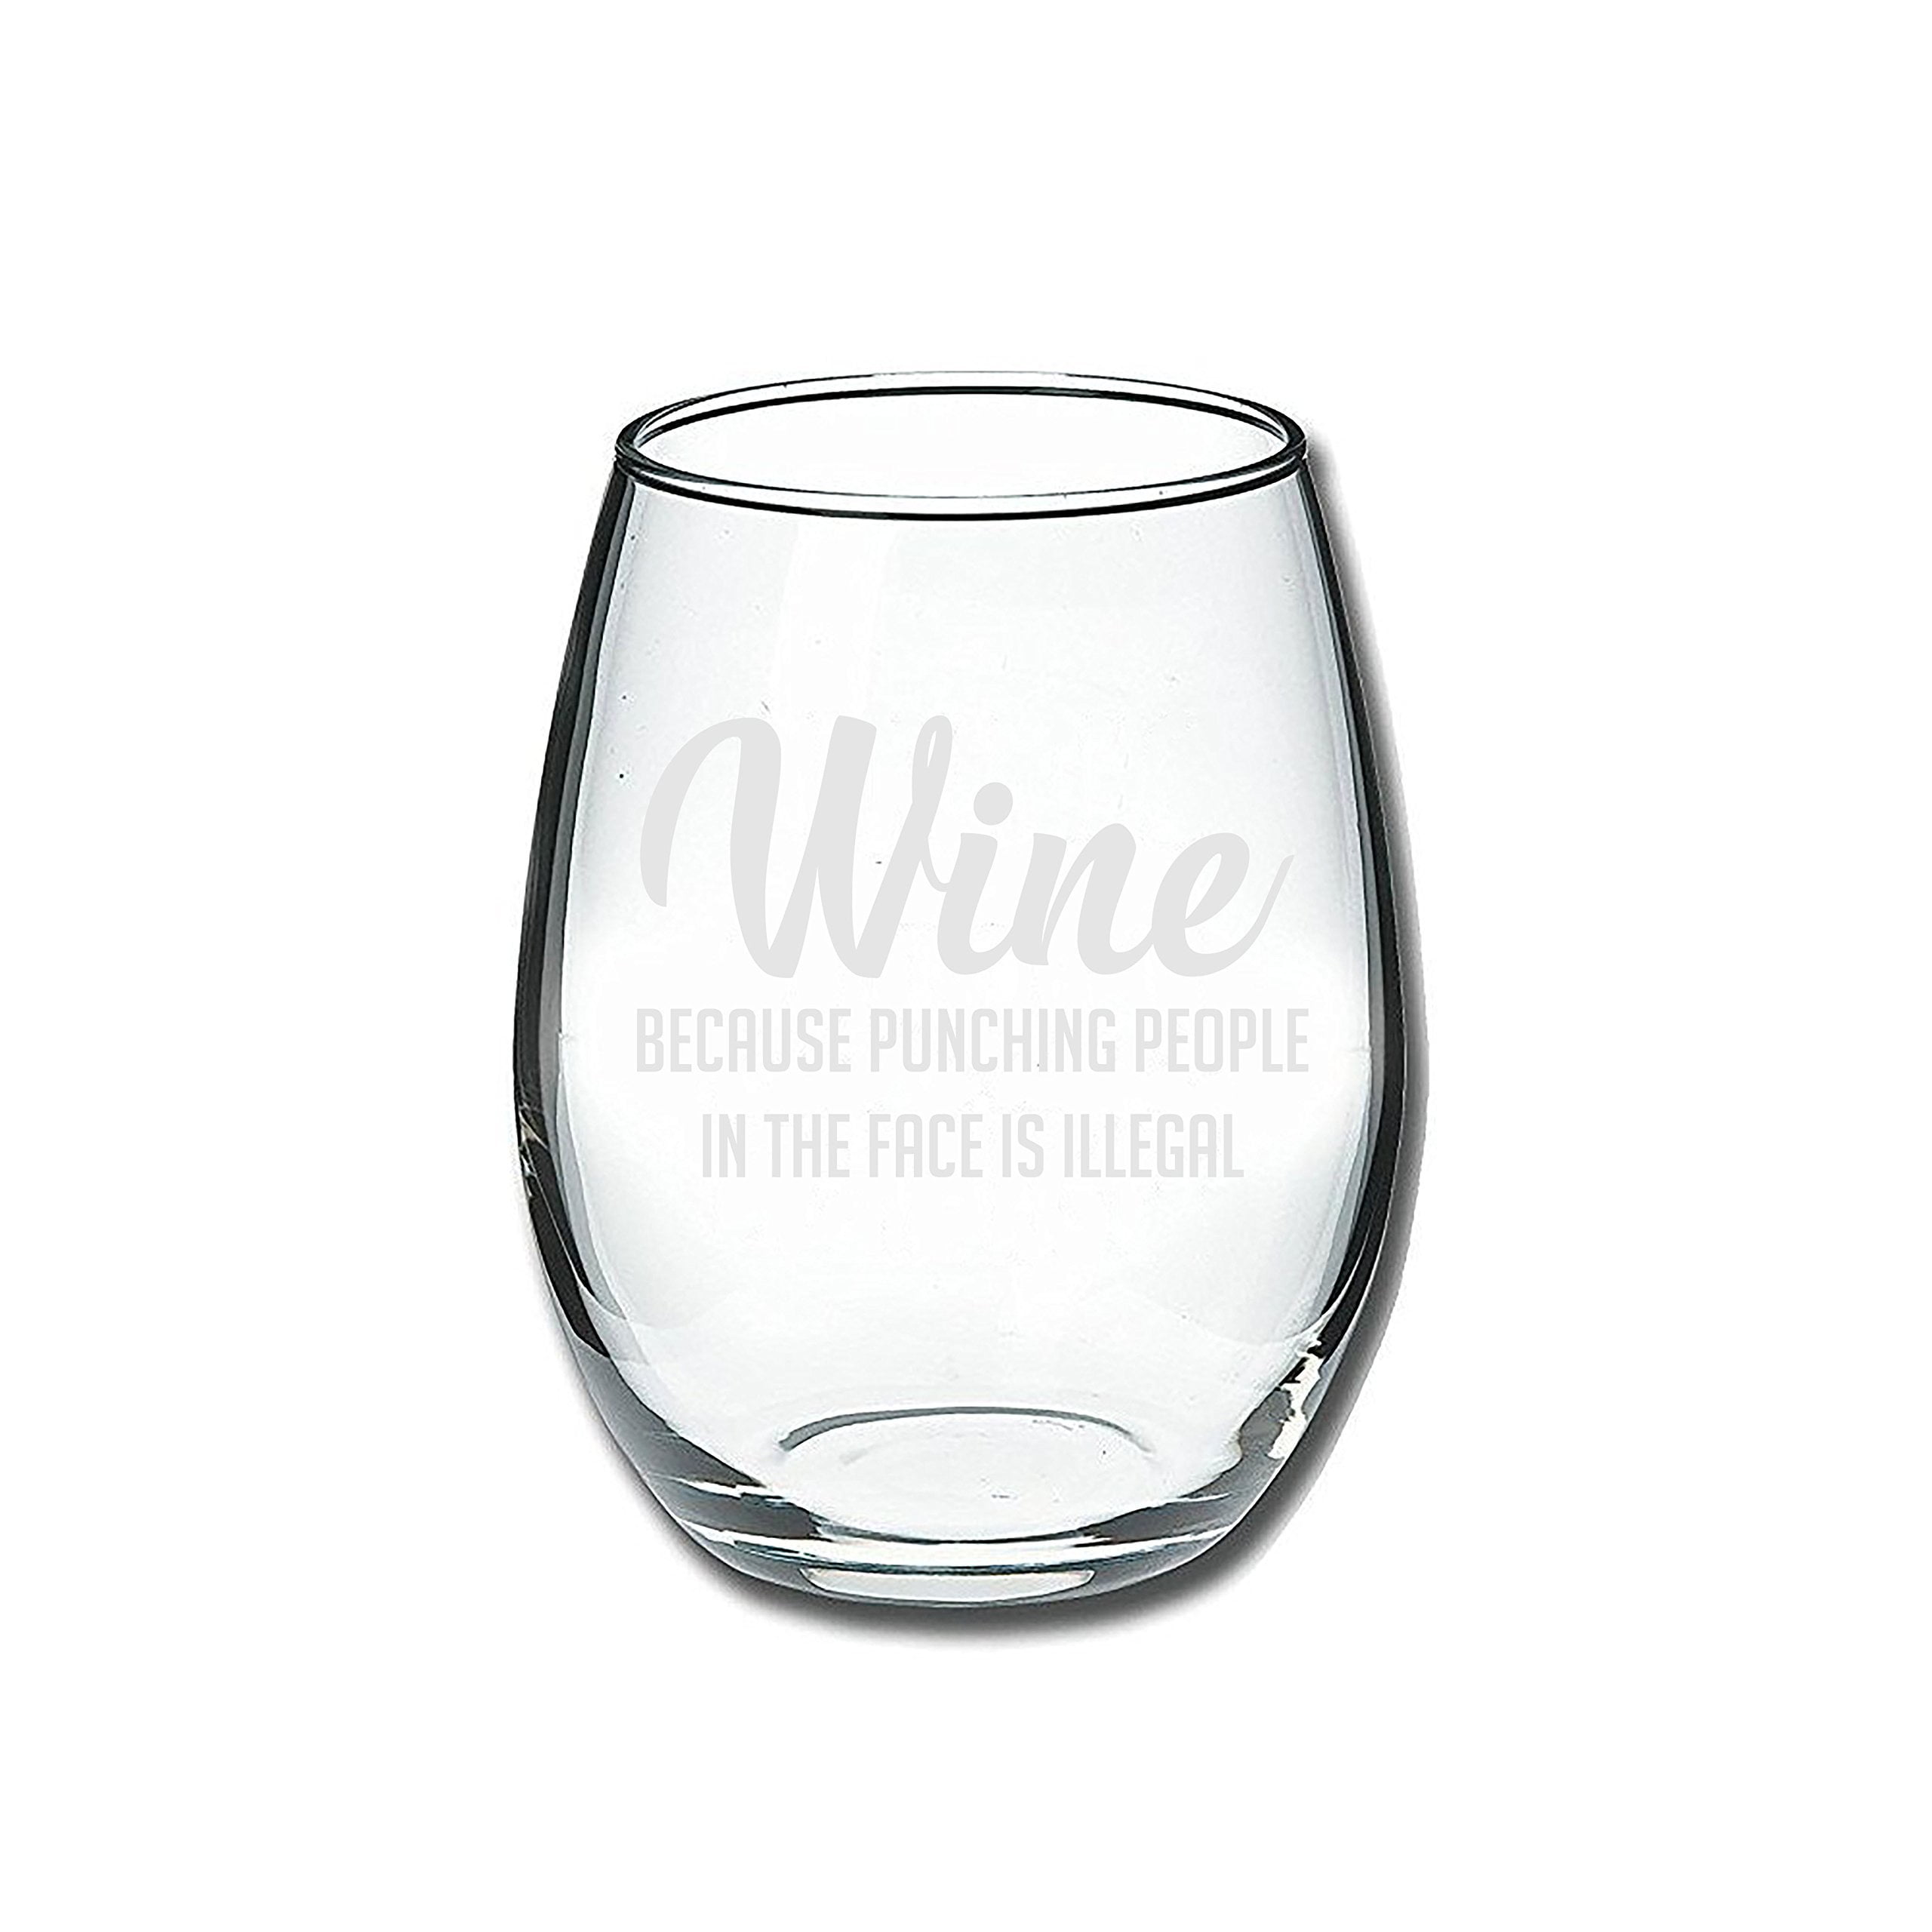 Floatable wine glasses exist and we can all die happy now